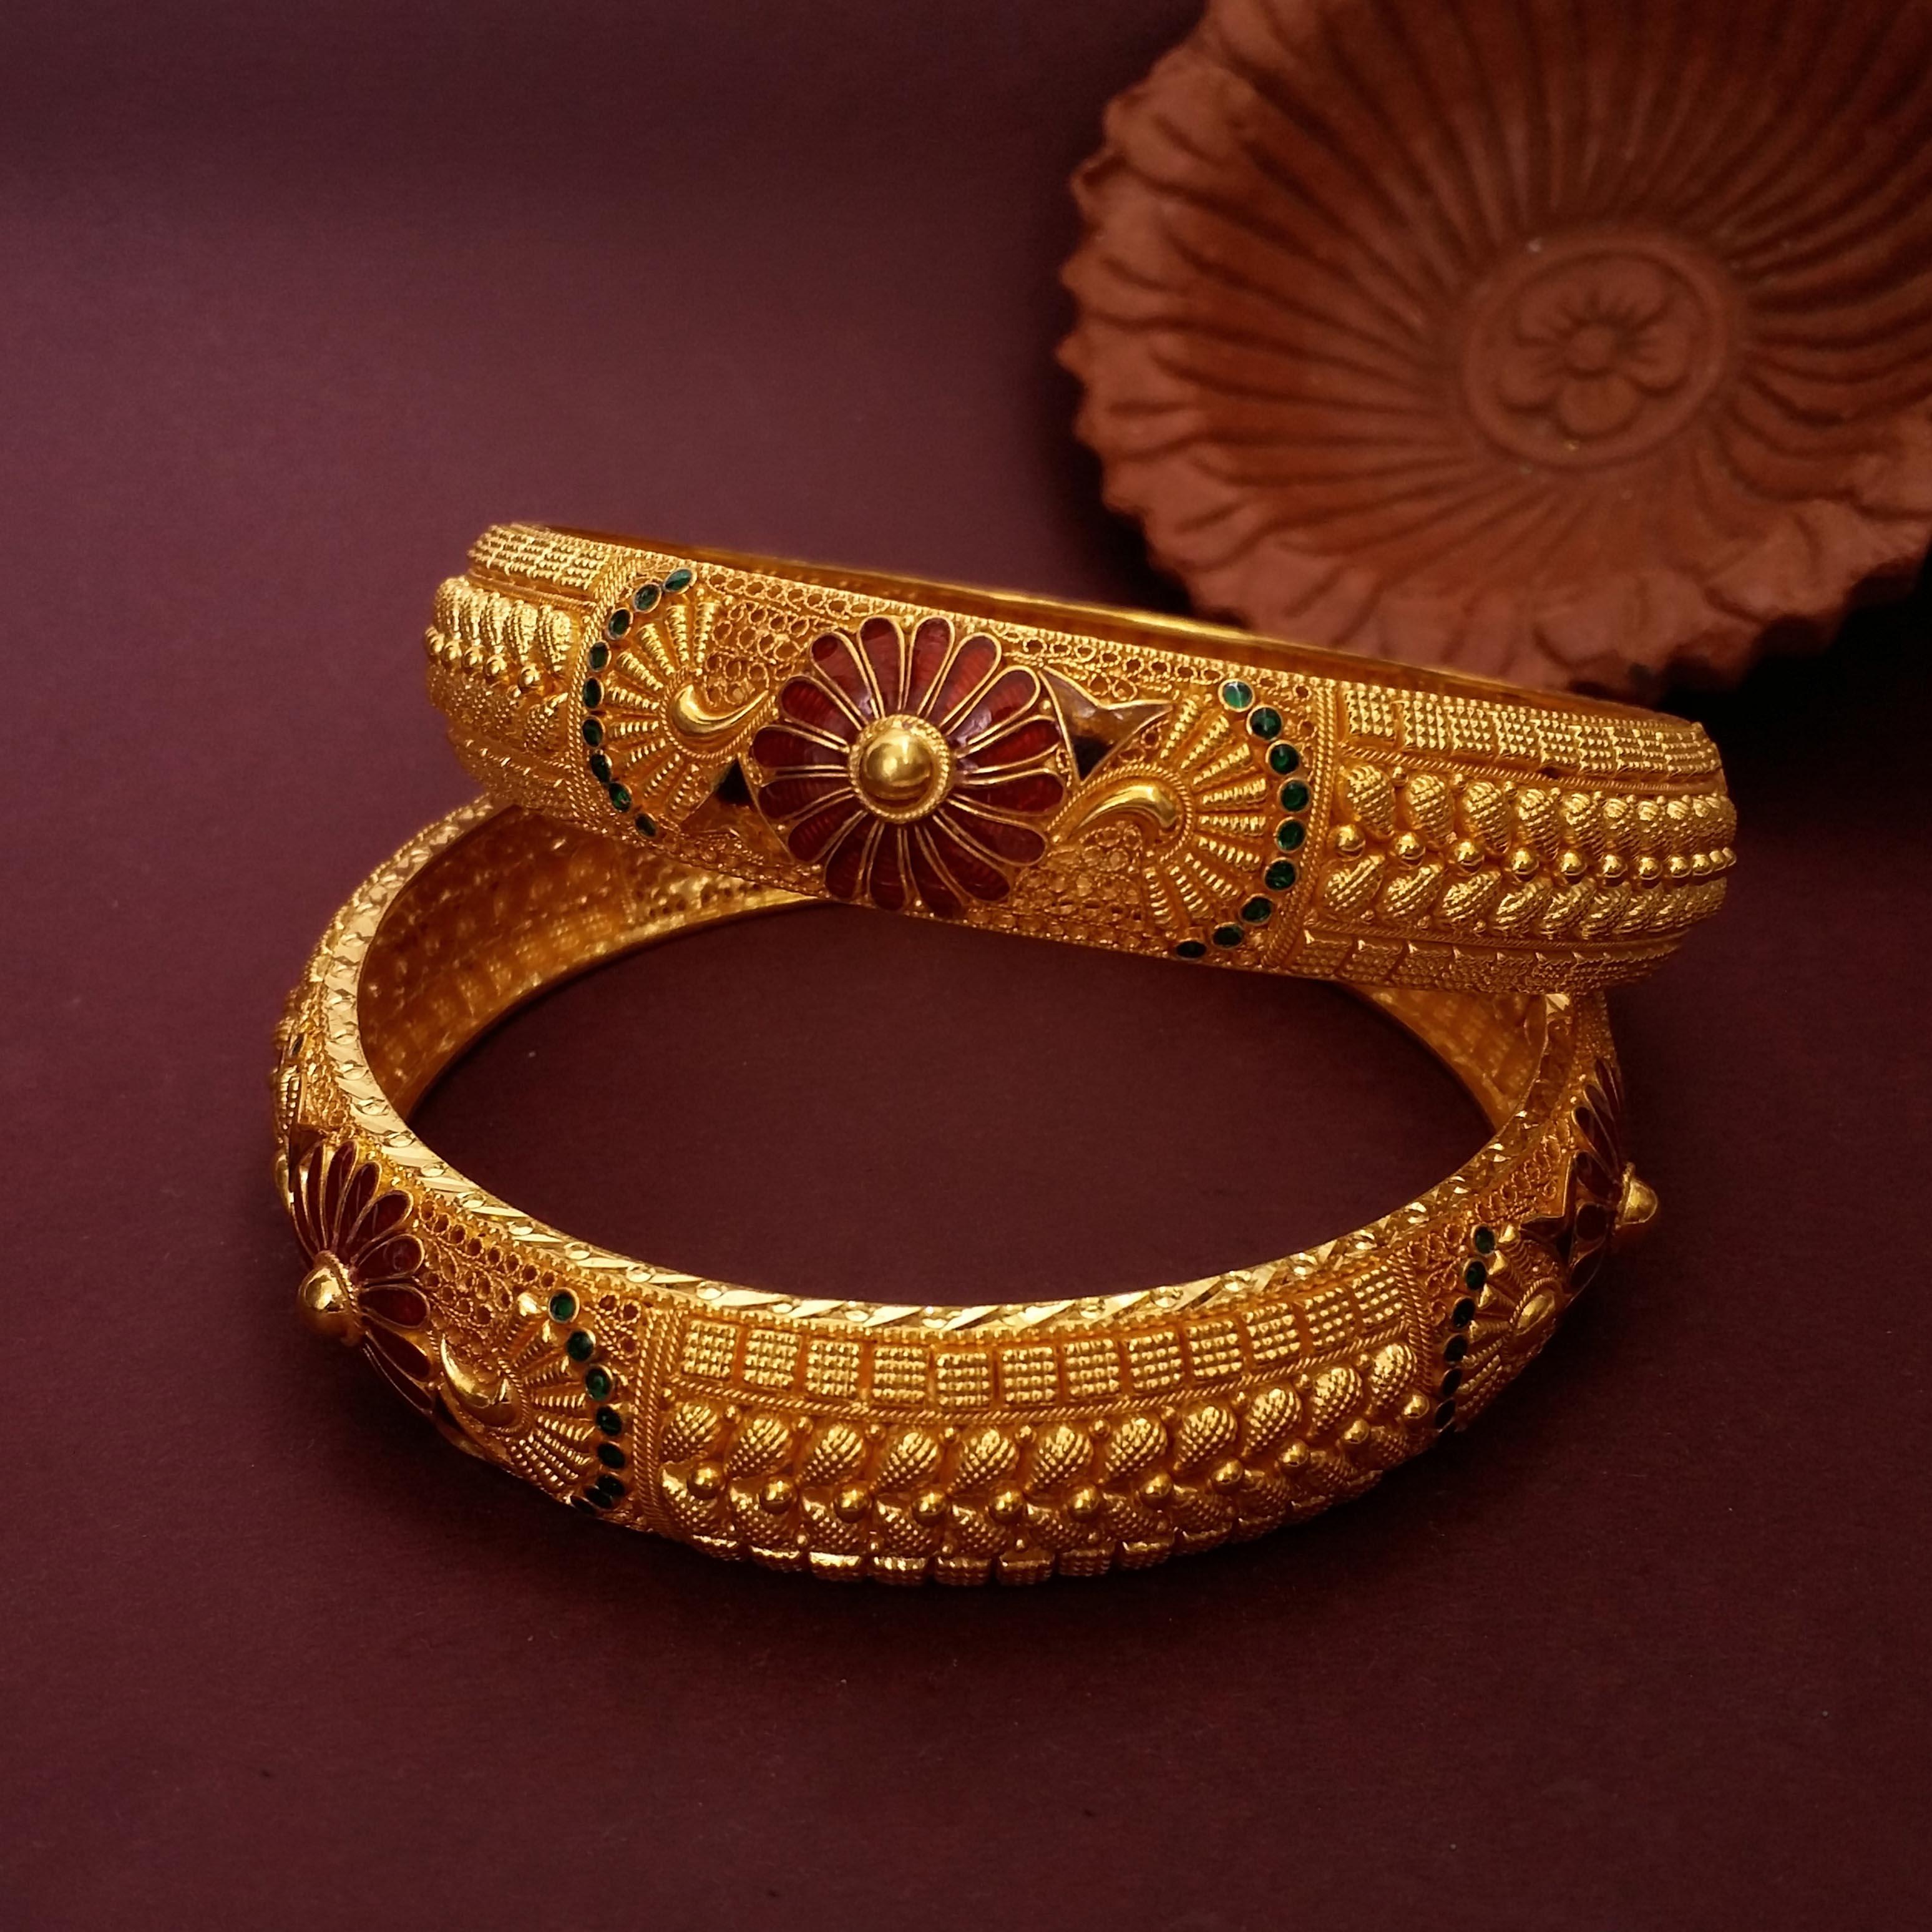 Buy Rupika Gold Bangles 22 KT yellow gold (49.3 gm). At Best Price In India. Check Bangles & Bracelets New Designs At Giriraj Jewellers. BIS Care, Hallmark, 100% Certified | Trust & Quality of Giriraj Jewellers India | 24k gold bangles online | gold bangles for women new design | bracelet designs for wedding | buy gold diamond bangles | new gold bangles design | gold bracelet for mens with price | latest designs of gold bangles and kadas | trendy gold bangle for daily wear | gold bangles new design | gold kangan designs with price